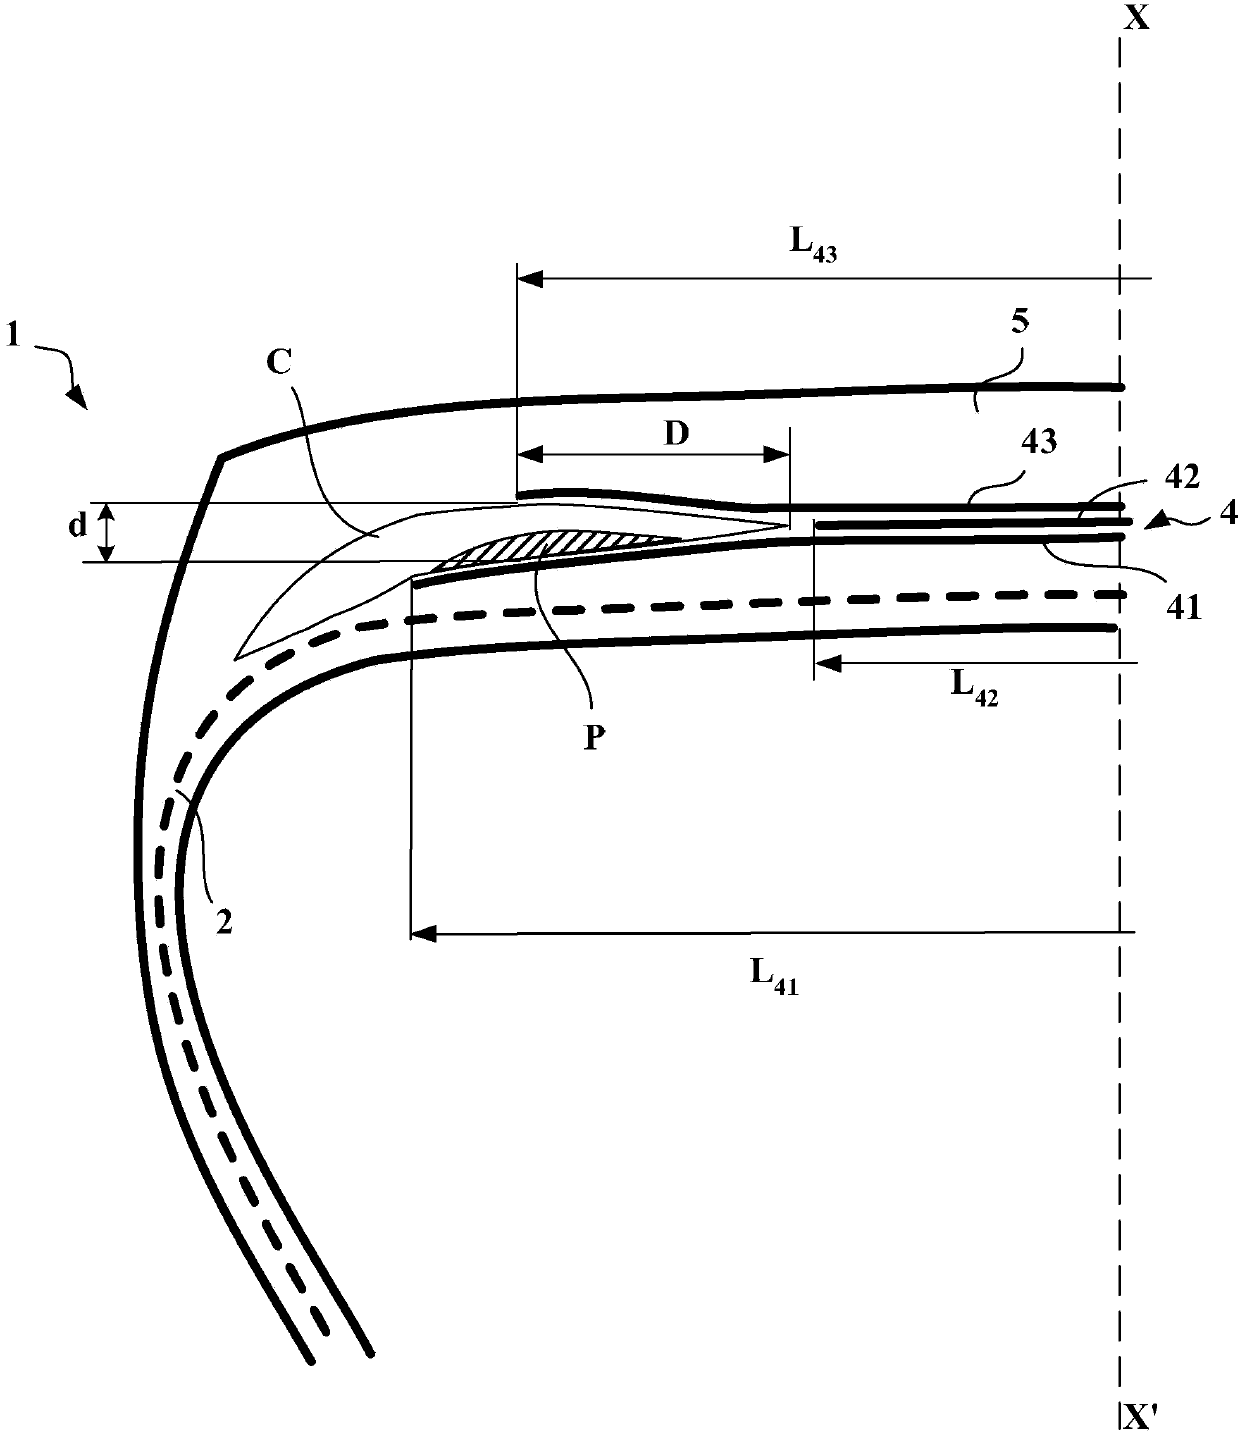 Tyre comprising a layer of circumferential reinforcing elements